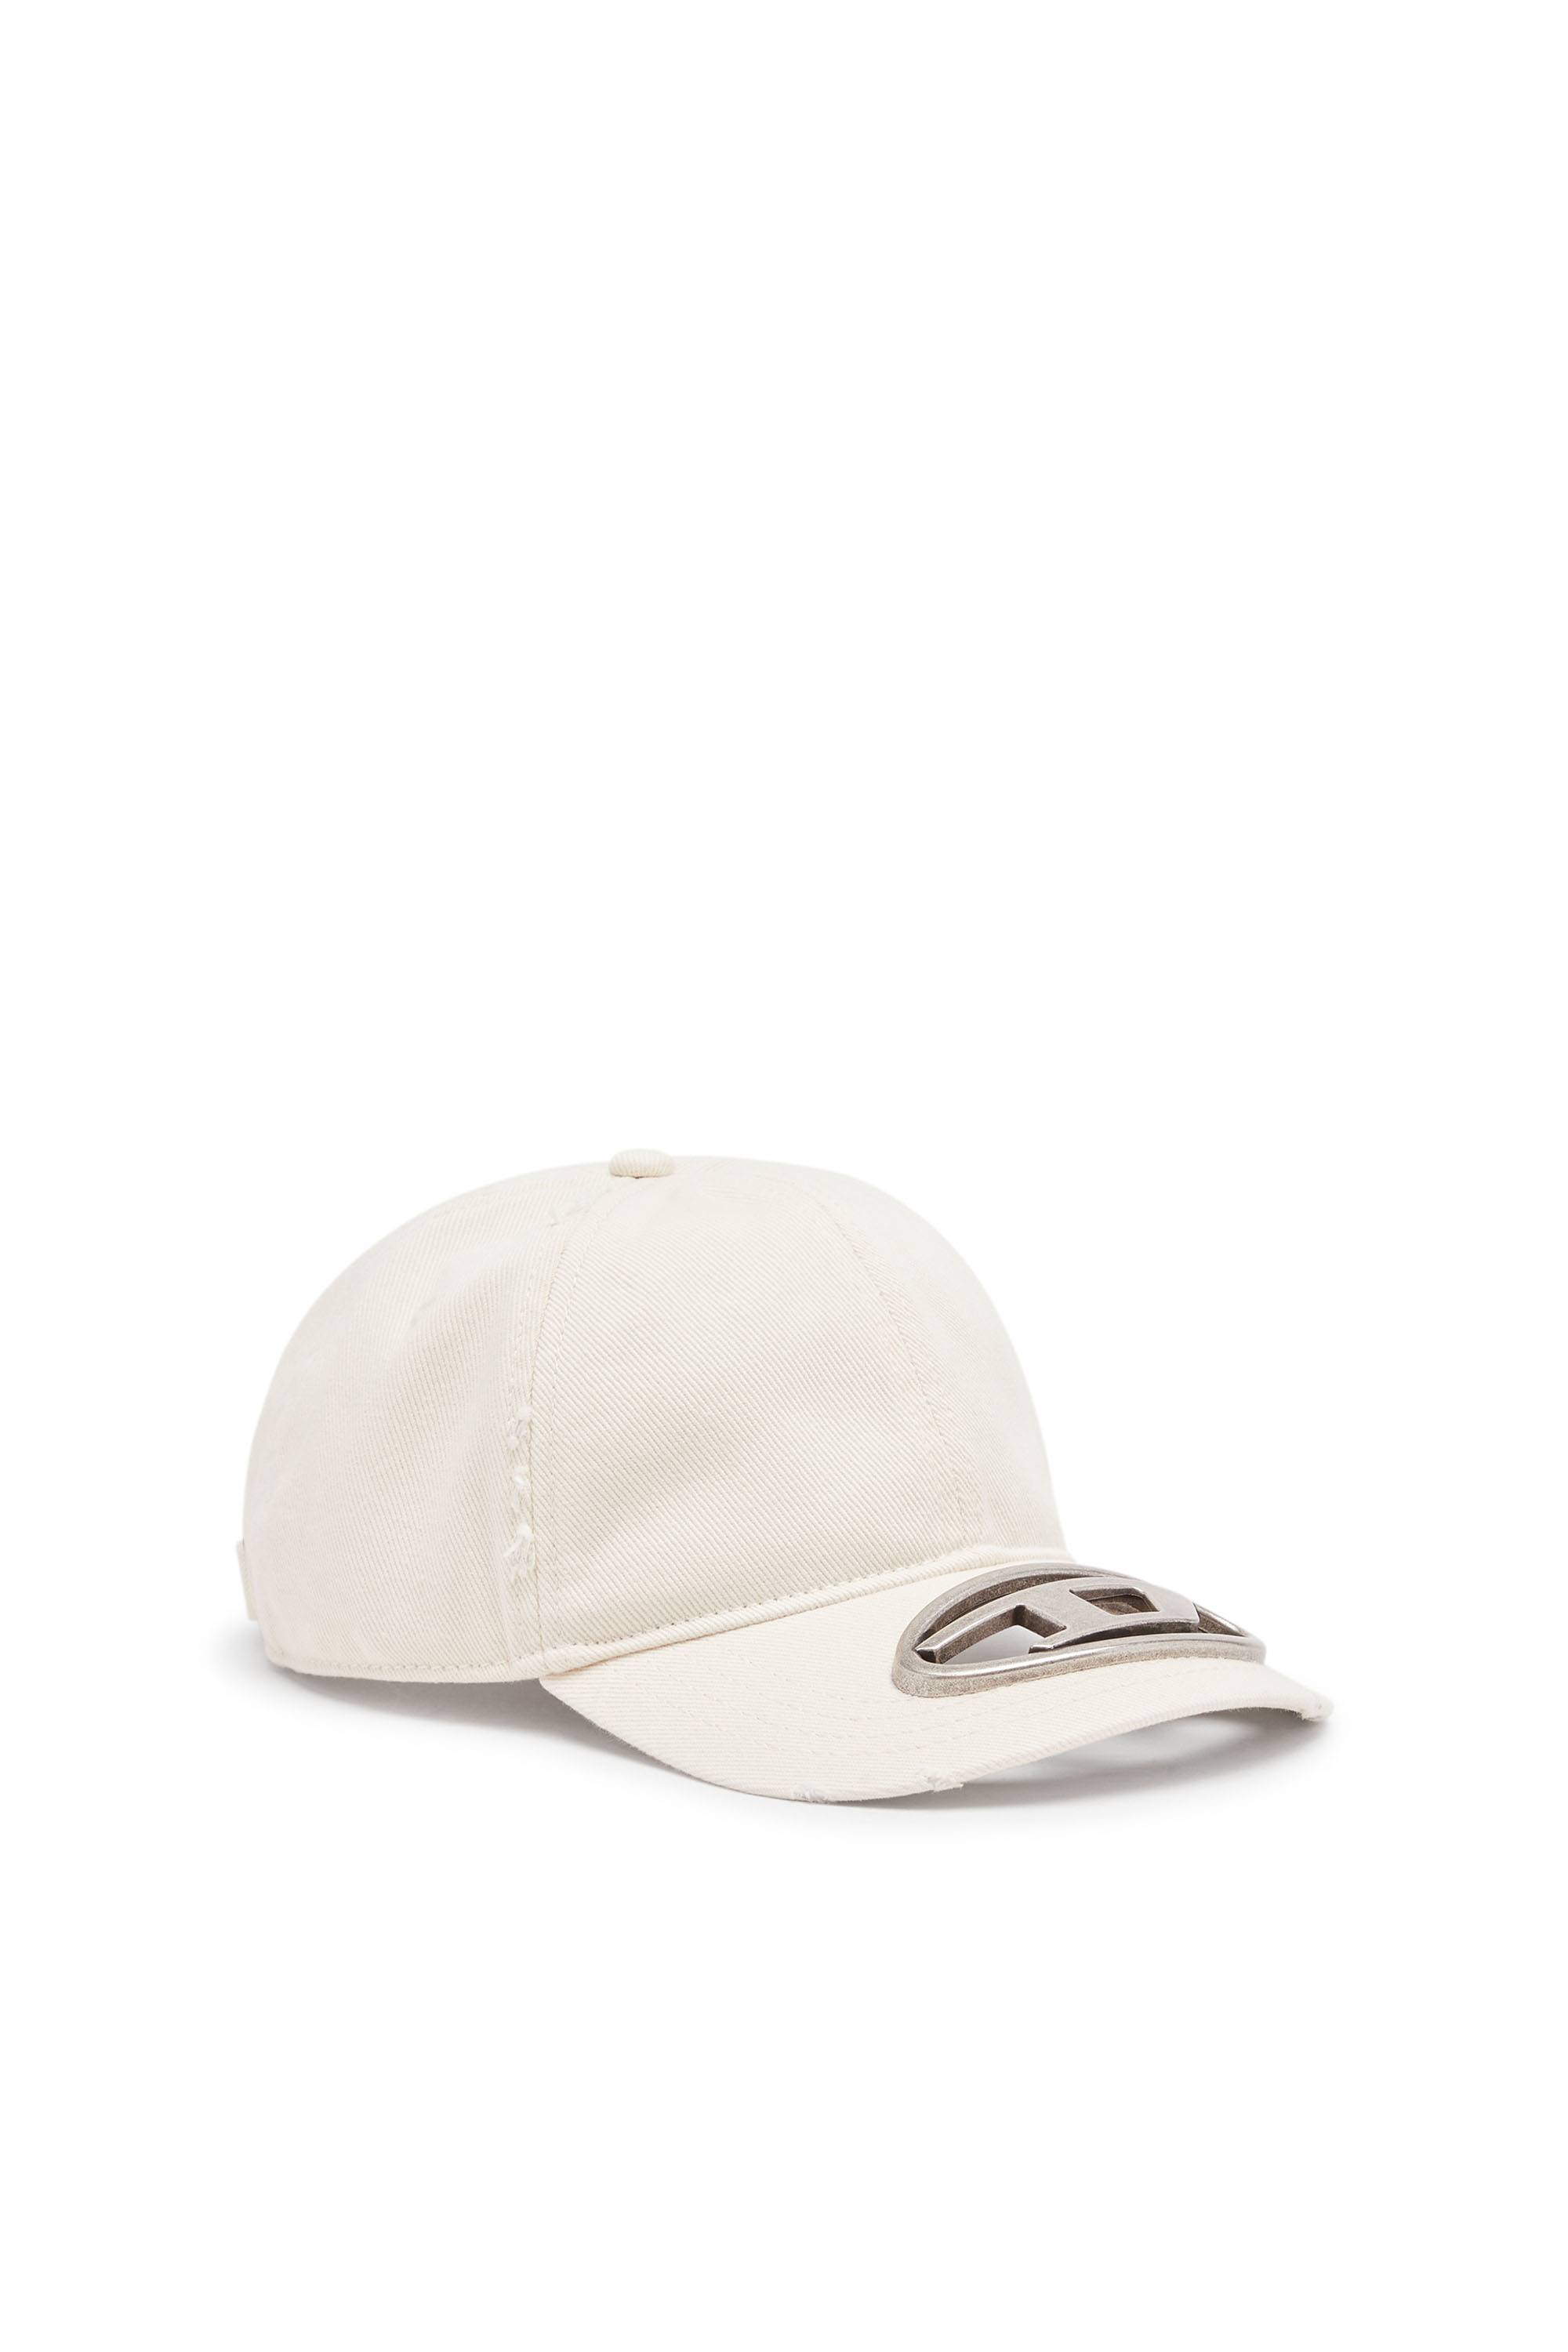 Diesel - C-BEAST-A1, Man Baseball cap with metal Oval D plaque in White - Image 1